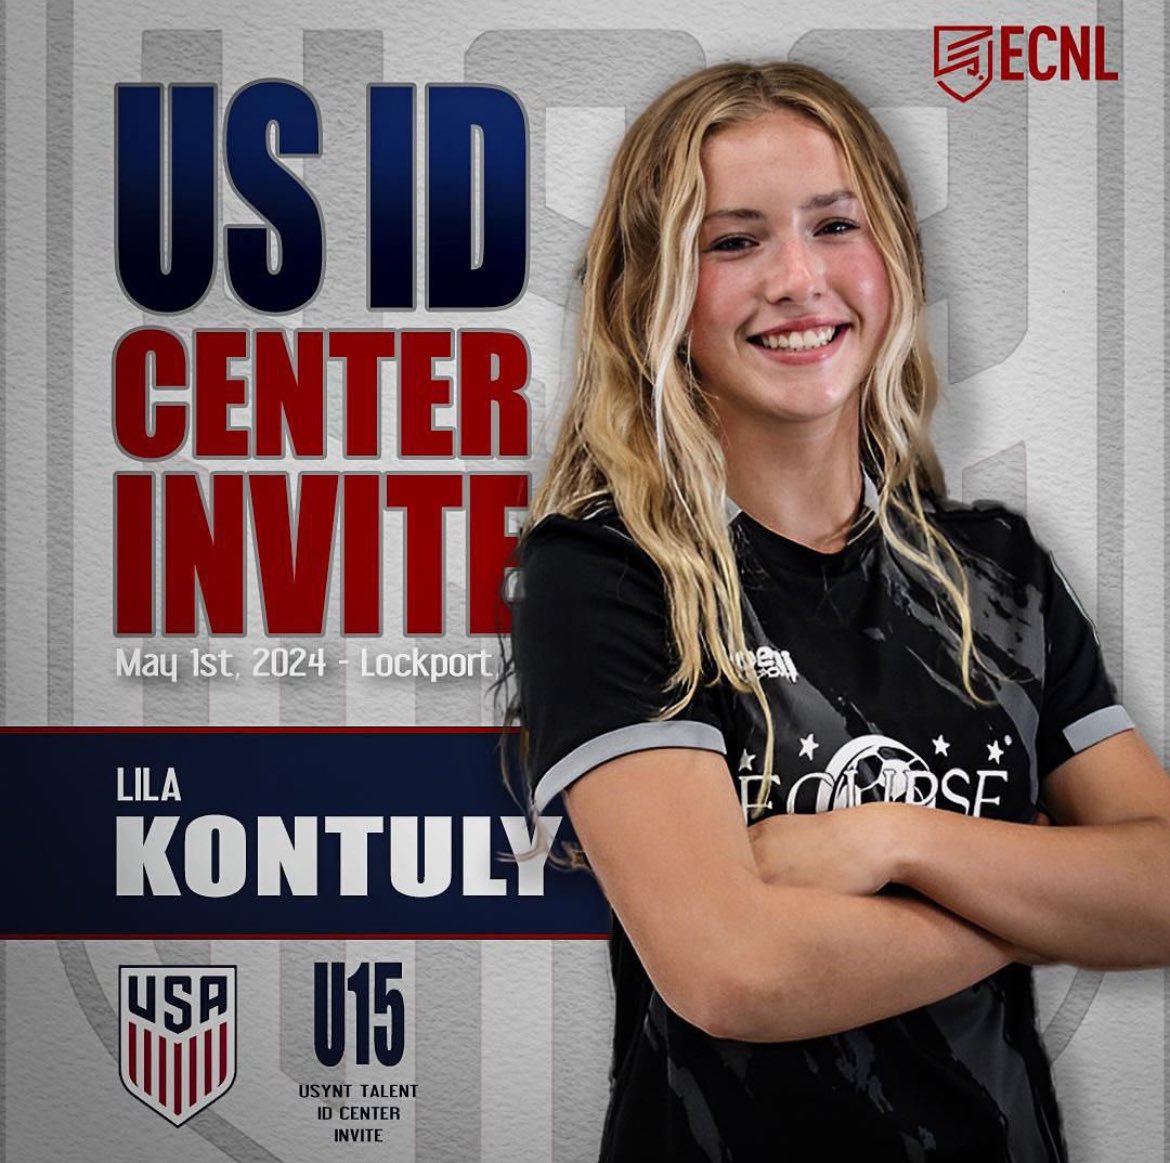 Although I cannot compete due to injury, l am very grateful and humbled to be recognized by @ussoccer again! Congrats to all the girls selected ♥️ @EclipseSelectSC @TopDrawerSoccer @PrepSoccer @TheSoccerWire @ImYouthSoccer @USYNT